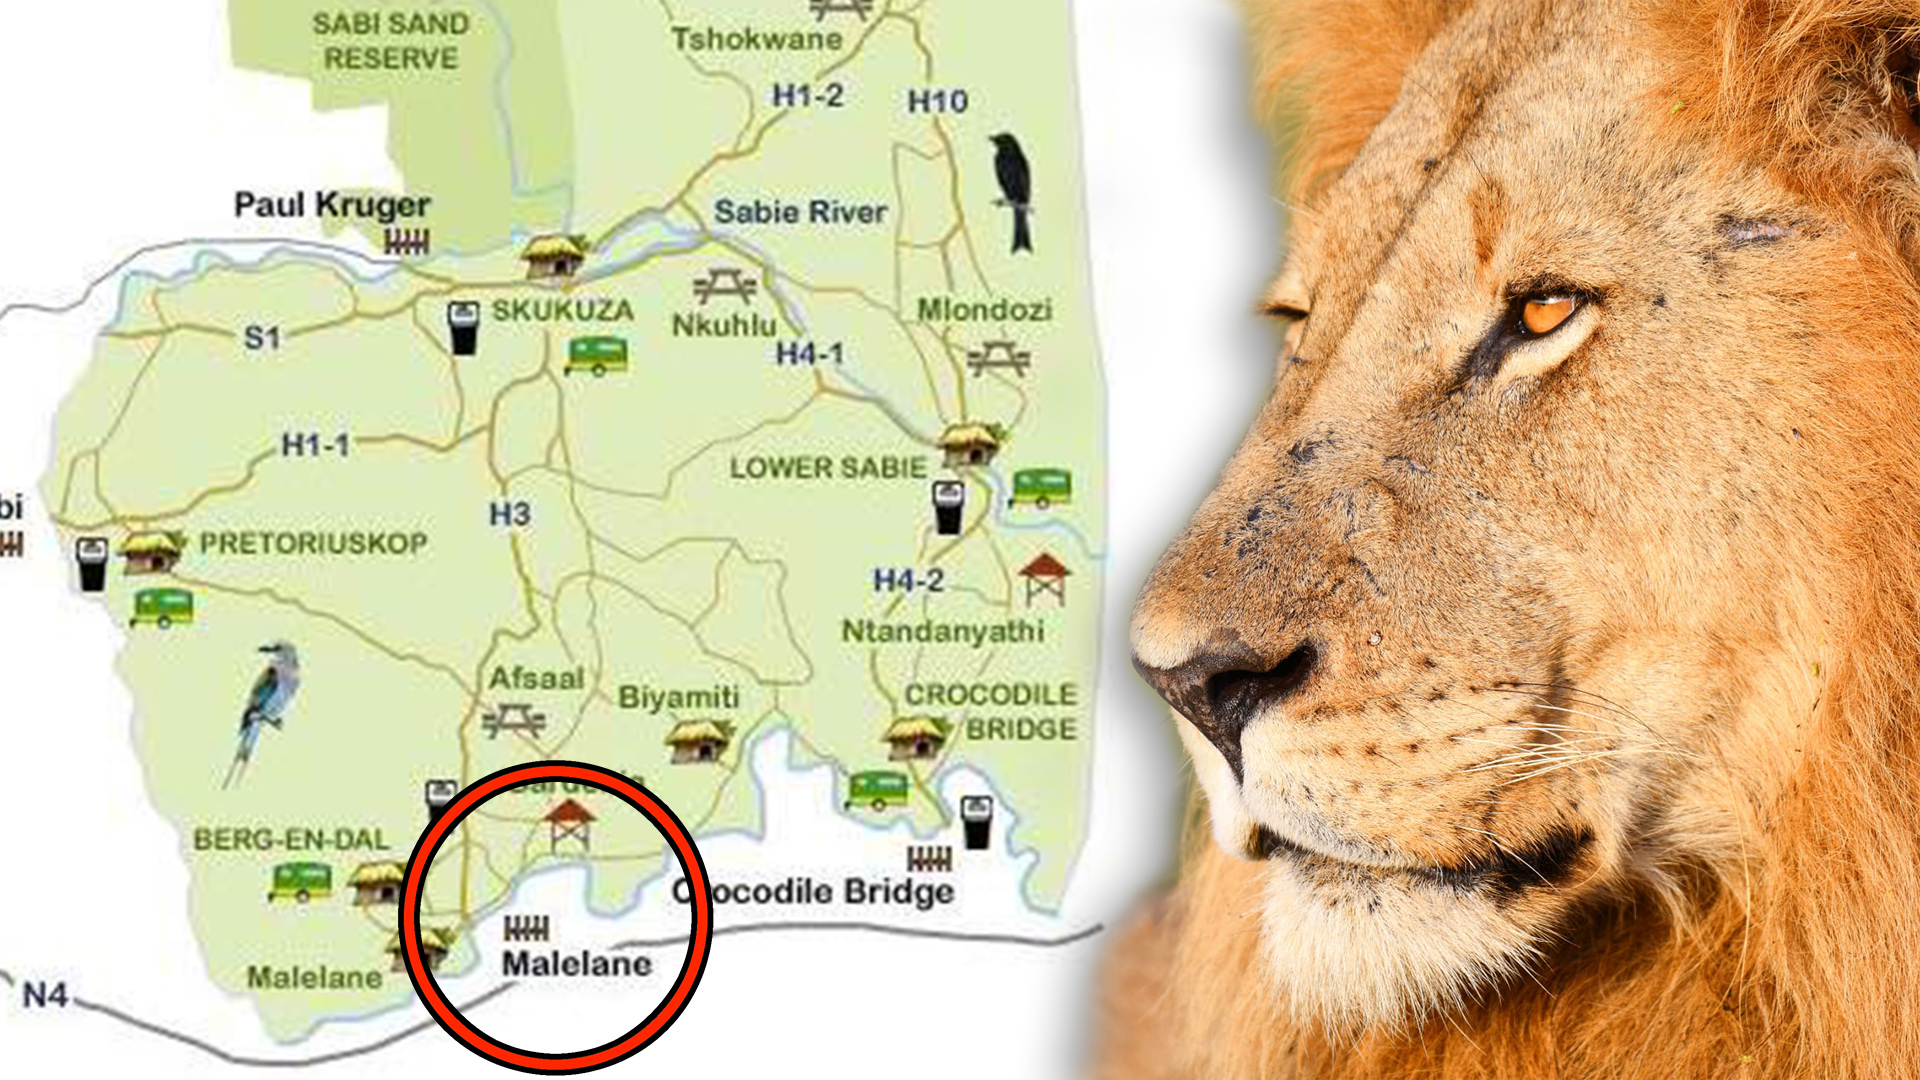 Malelane Rest Camp: Is it the new best place to see big cats?